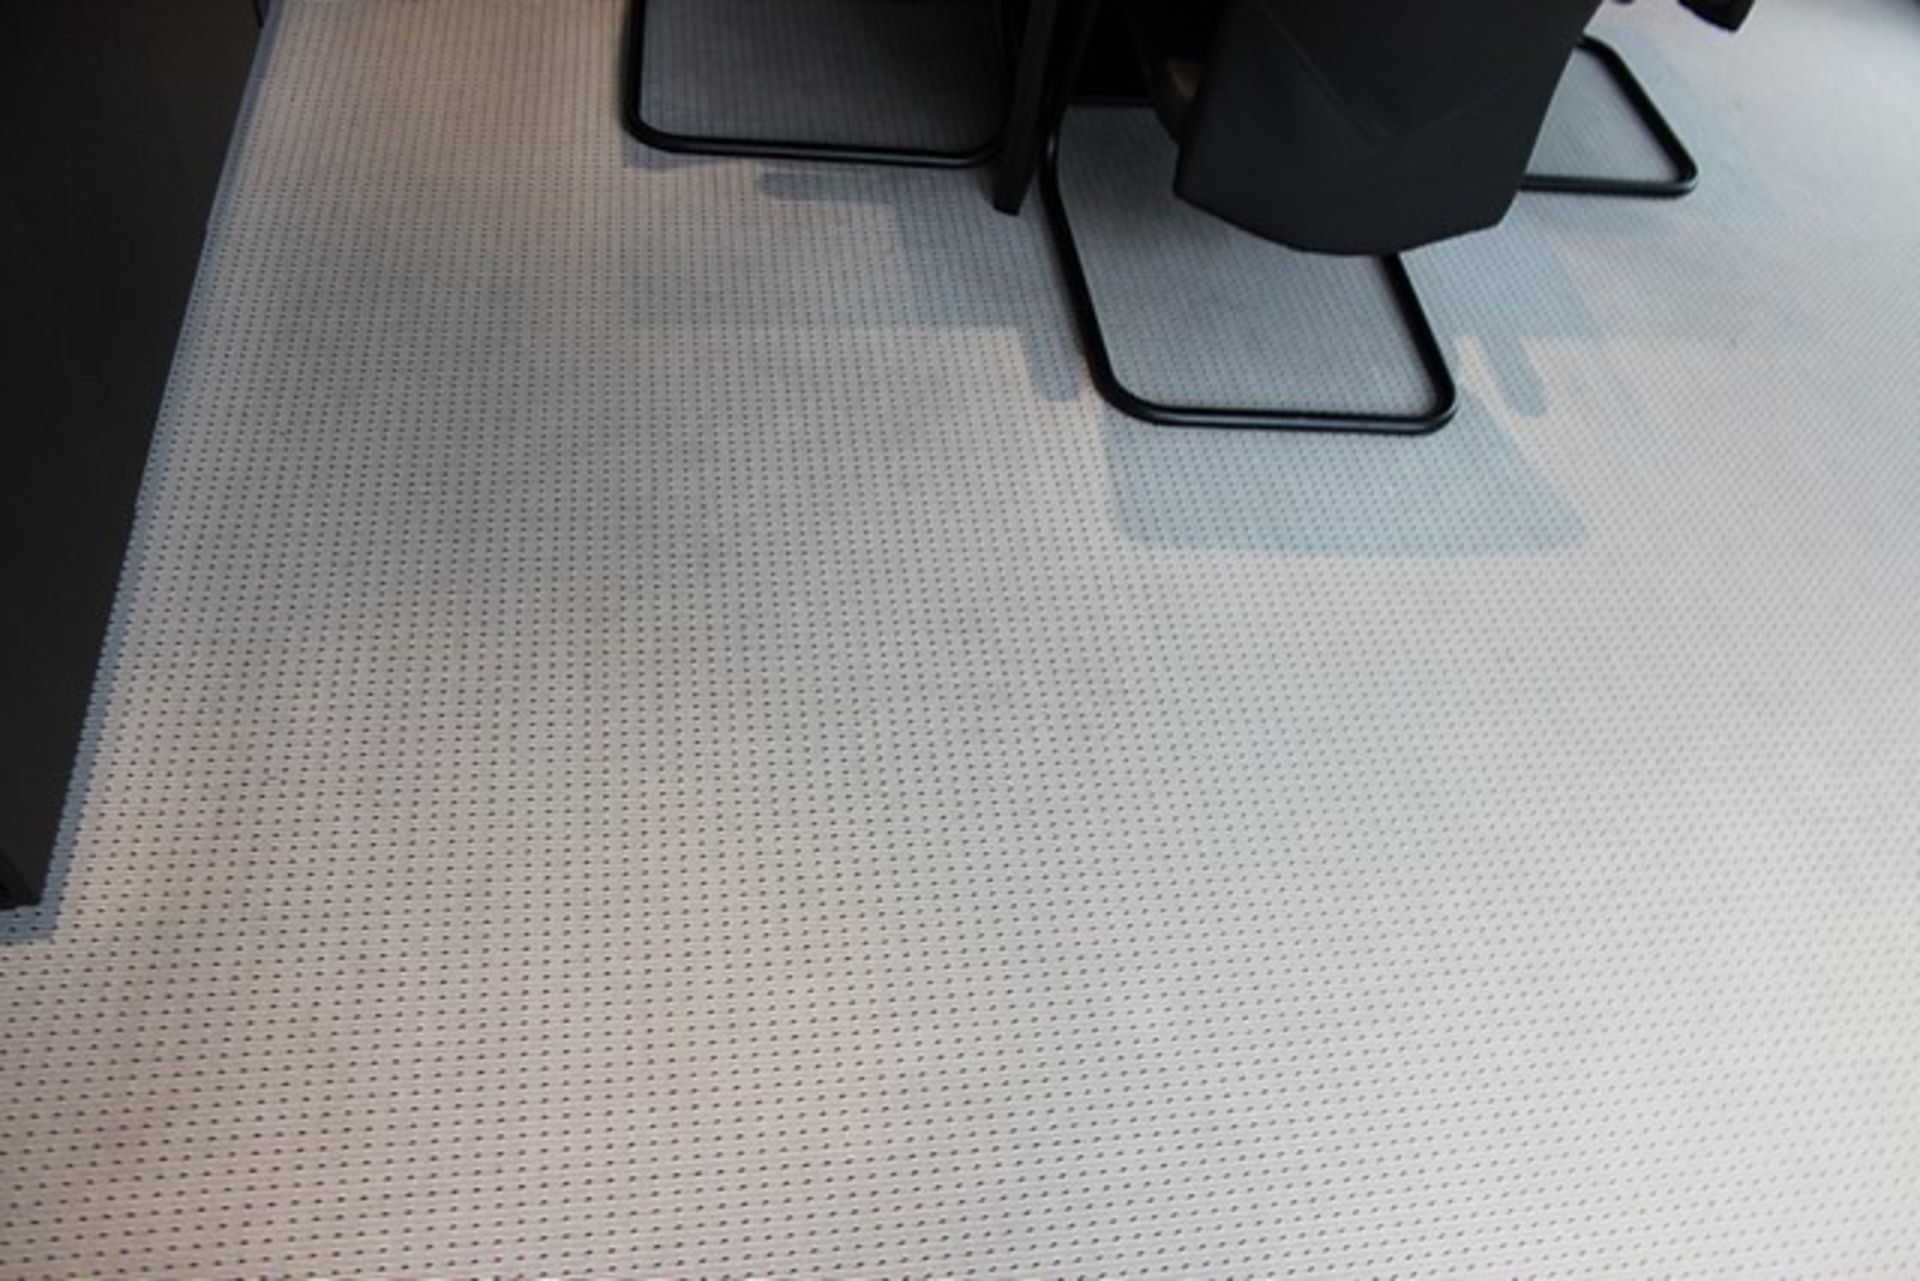 Commercial wool base carpet beige with repeating continual grey fleck pattern approximately 7m x 3. - Image 2 of 2